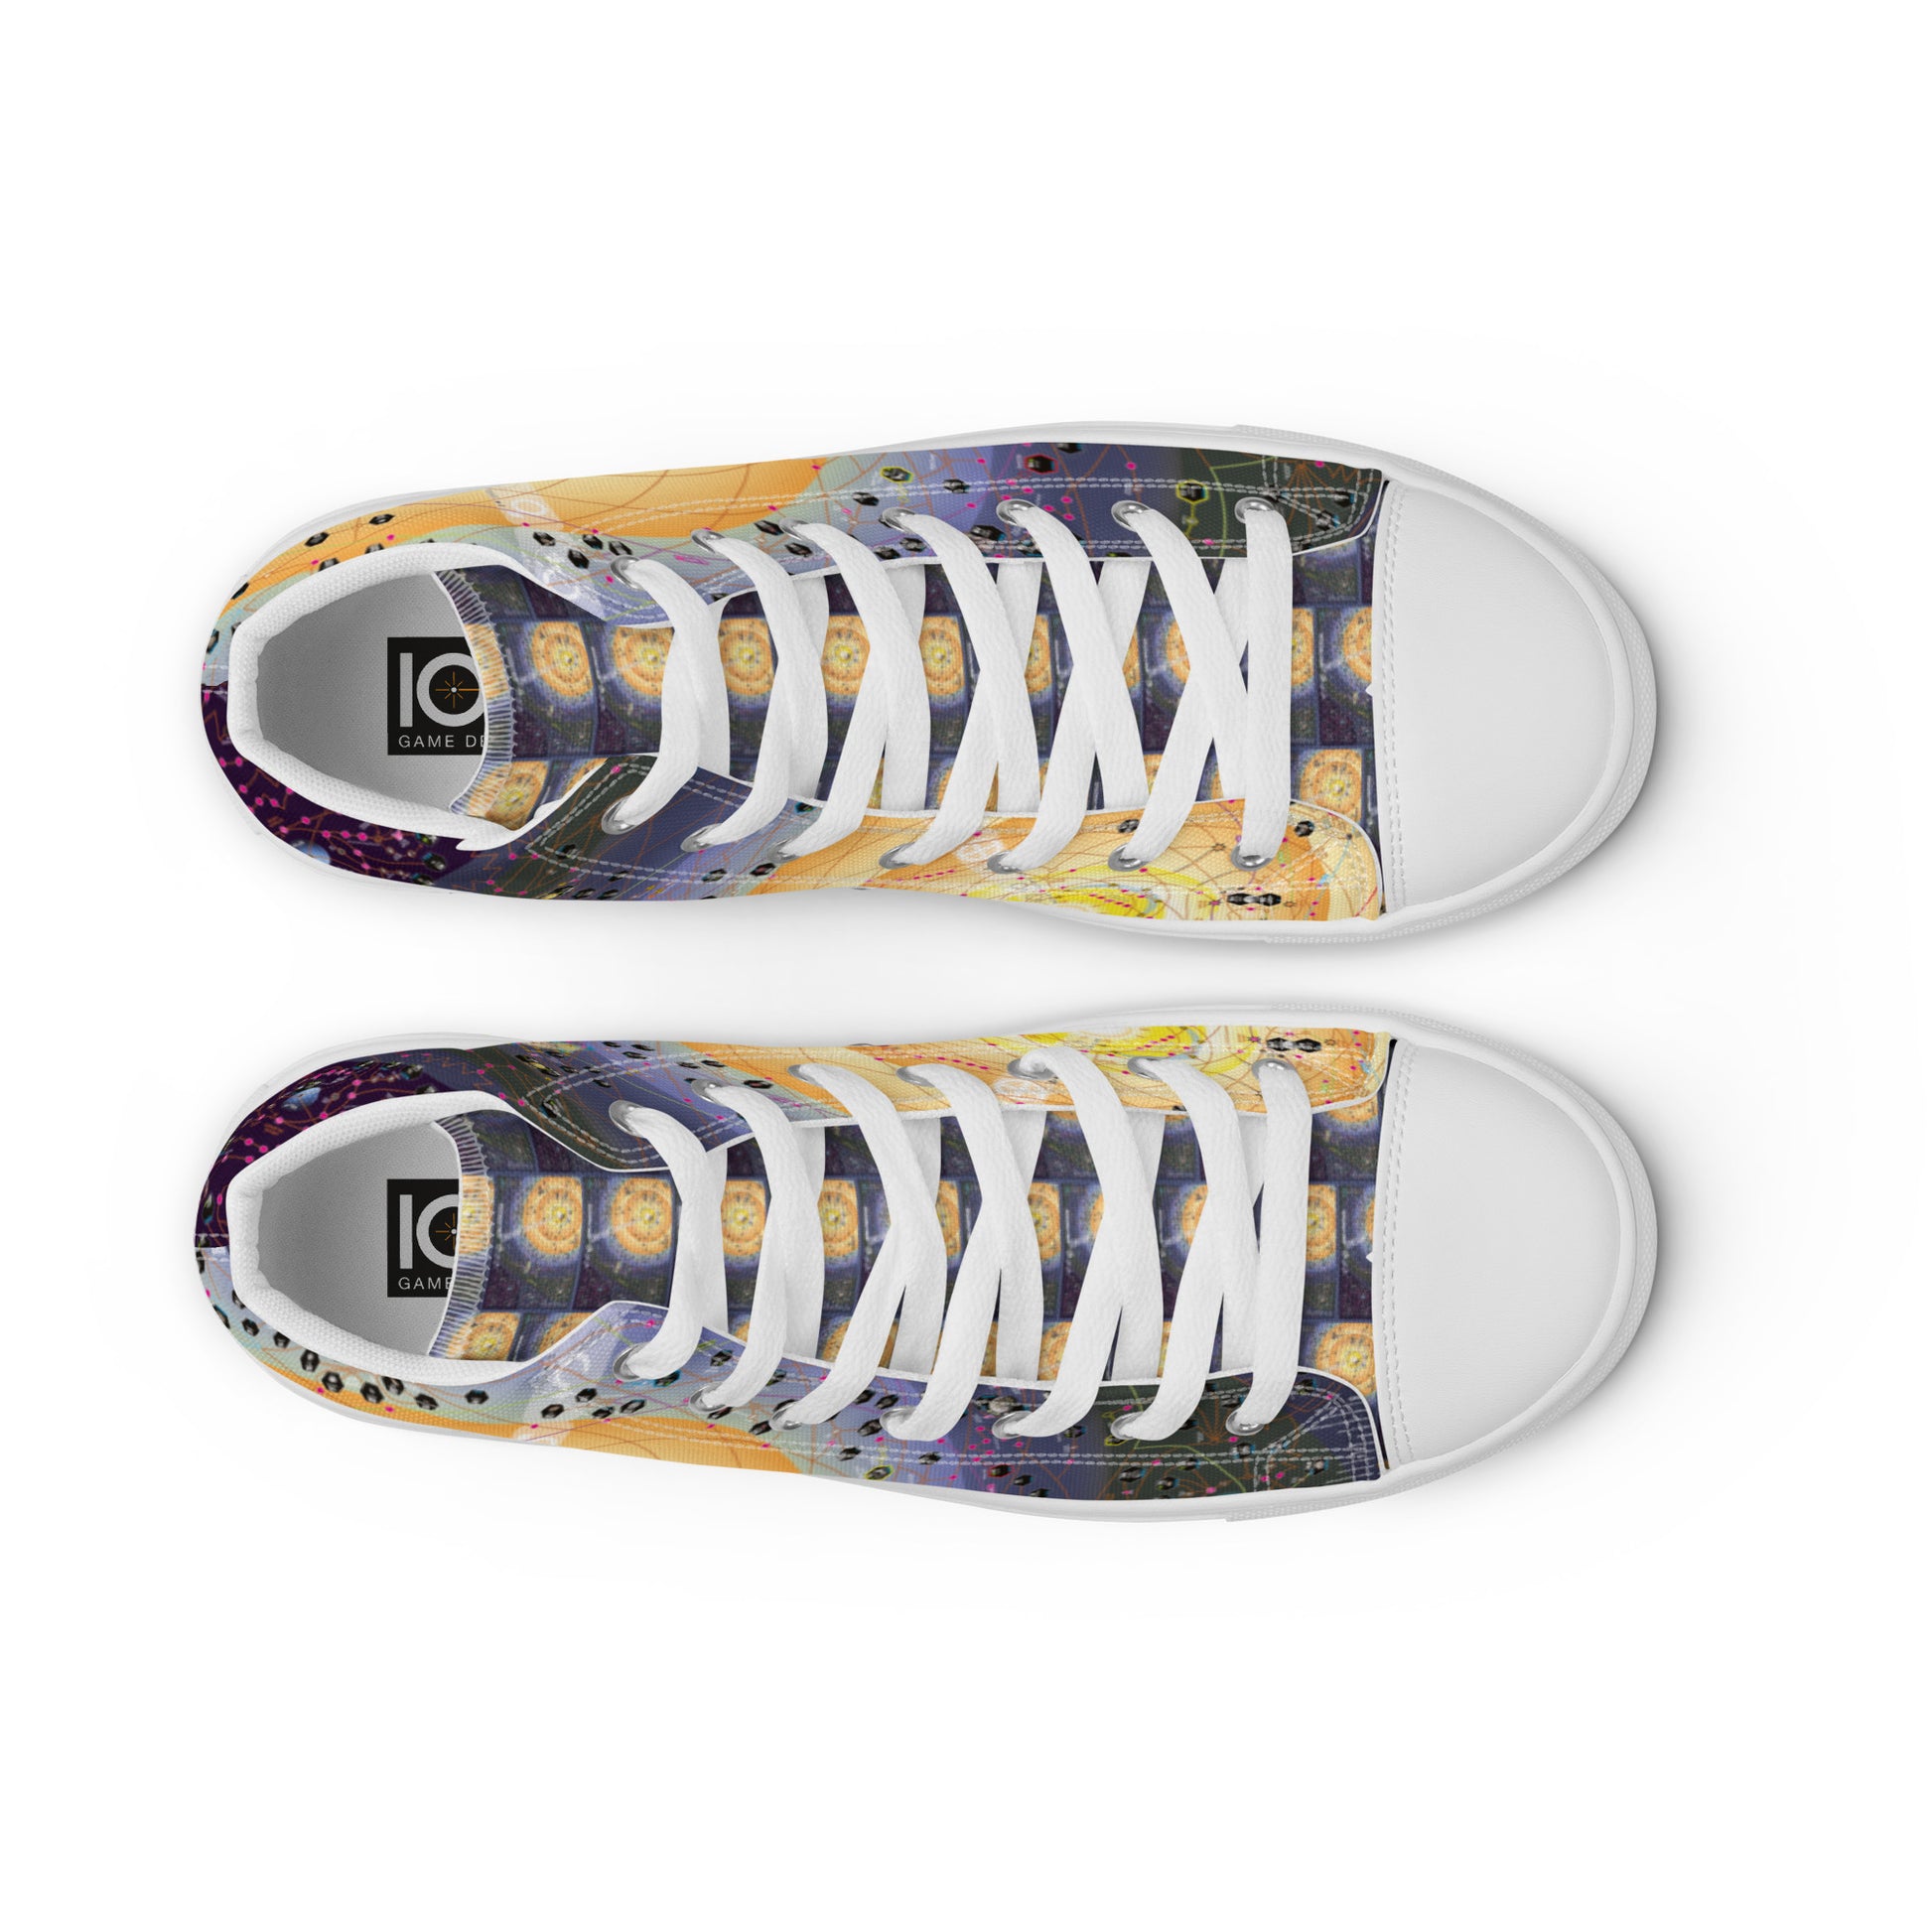 HIGH FRONTIER 4 ALL Sun Map: Men’s high top canvas shoes - overhead view of shoes